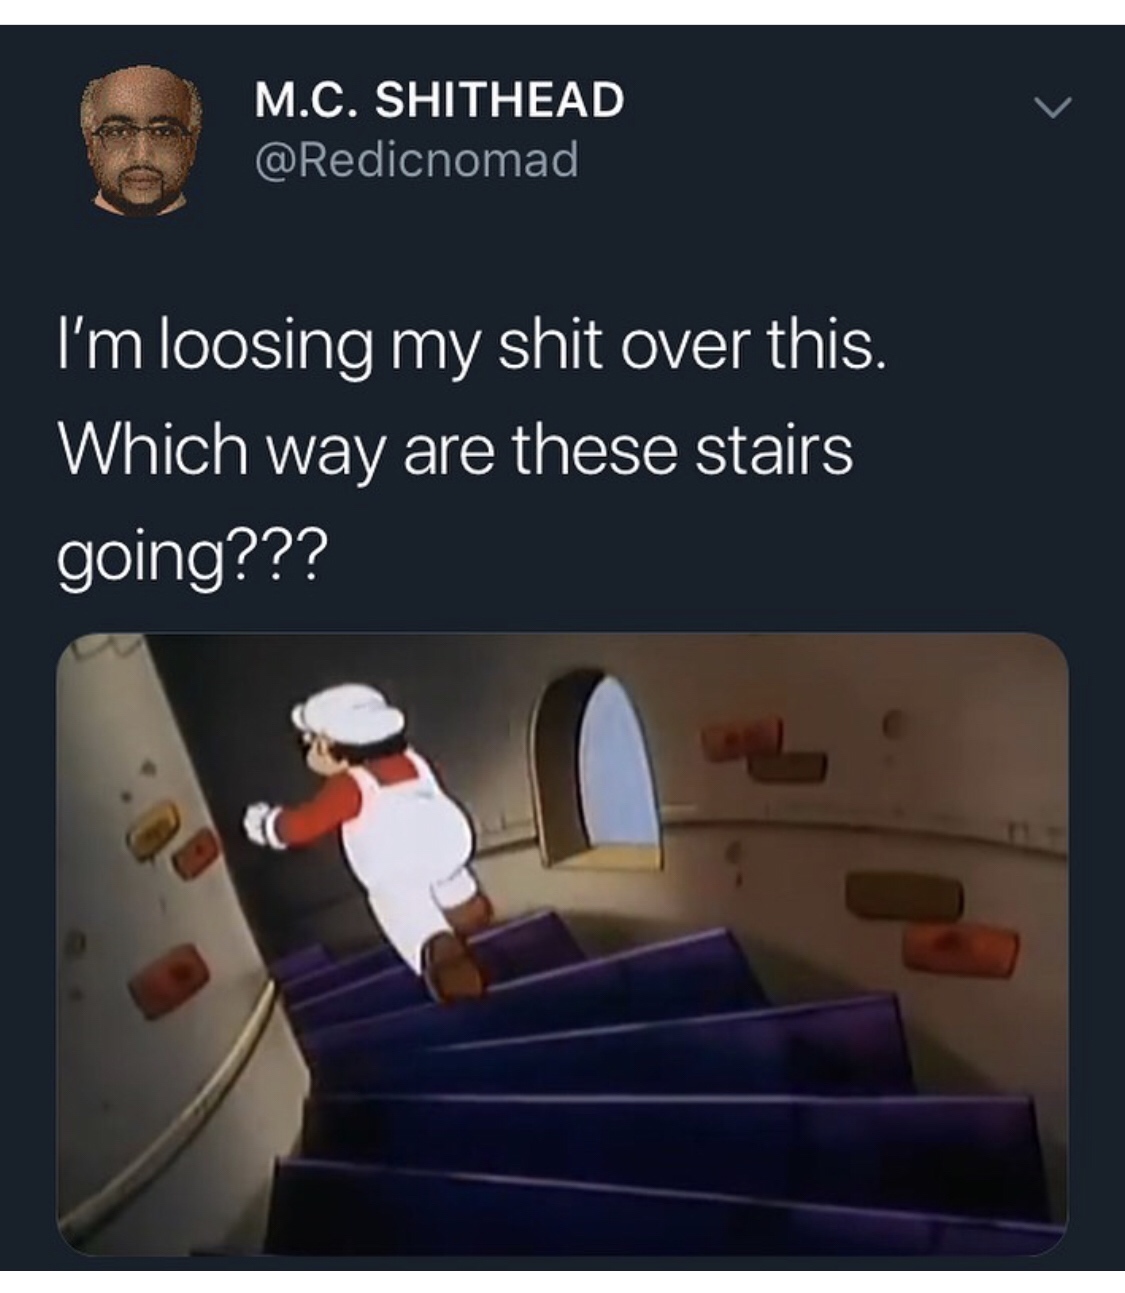 mario going up or down the stairs - M.C. Shithead I'm loosing my shit over this. Which way are these stairs going???